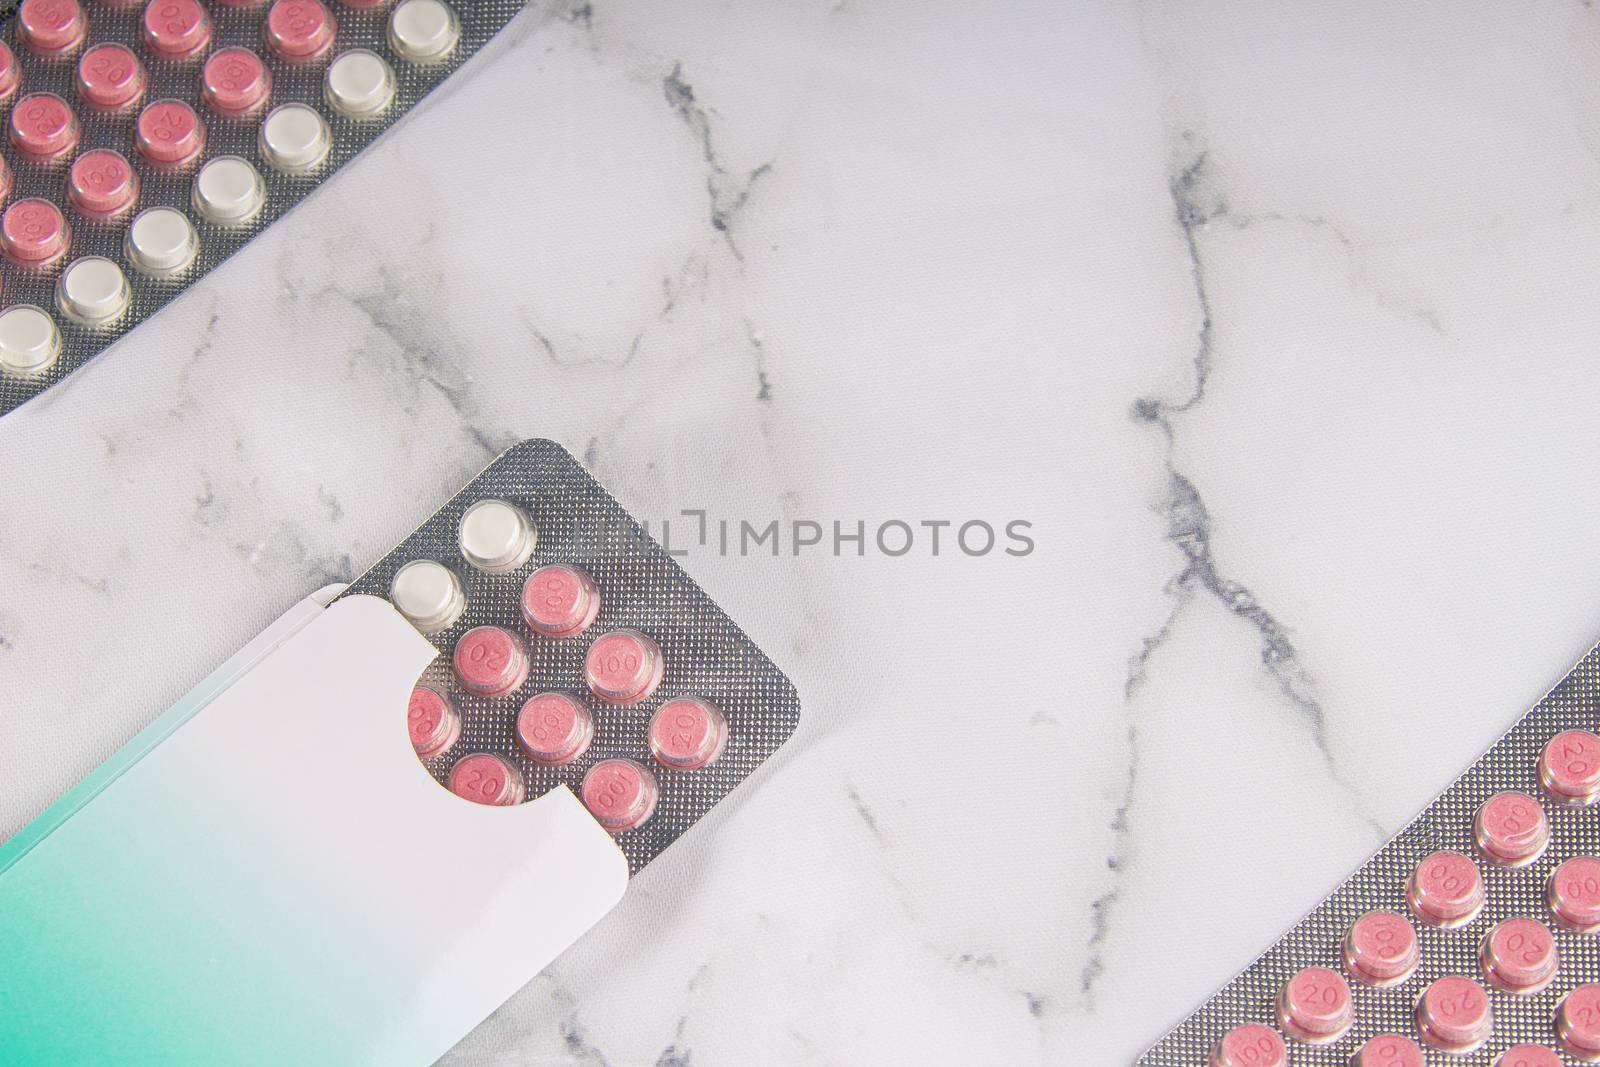 Birth control pills on a marble background by oasisamuel